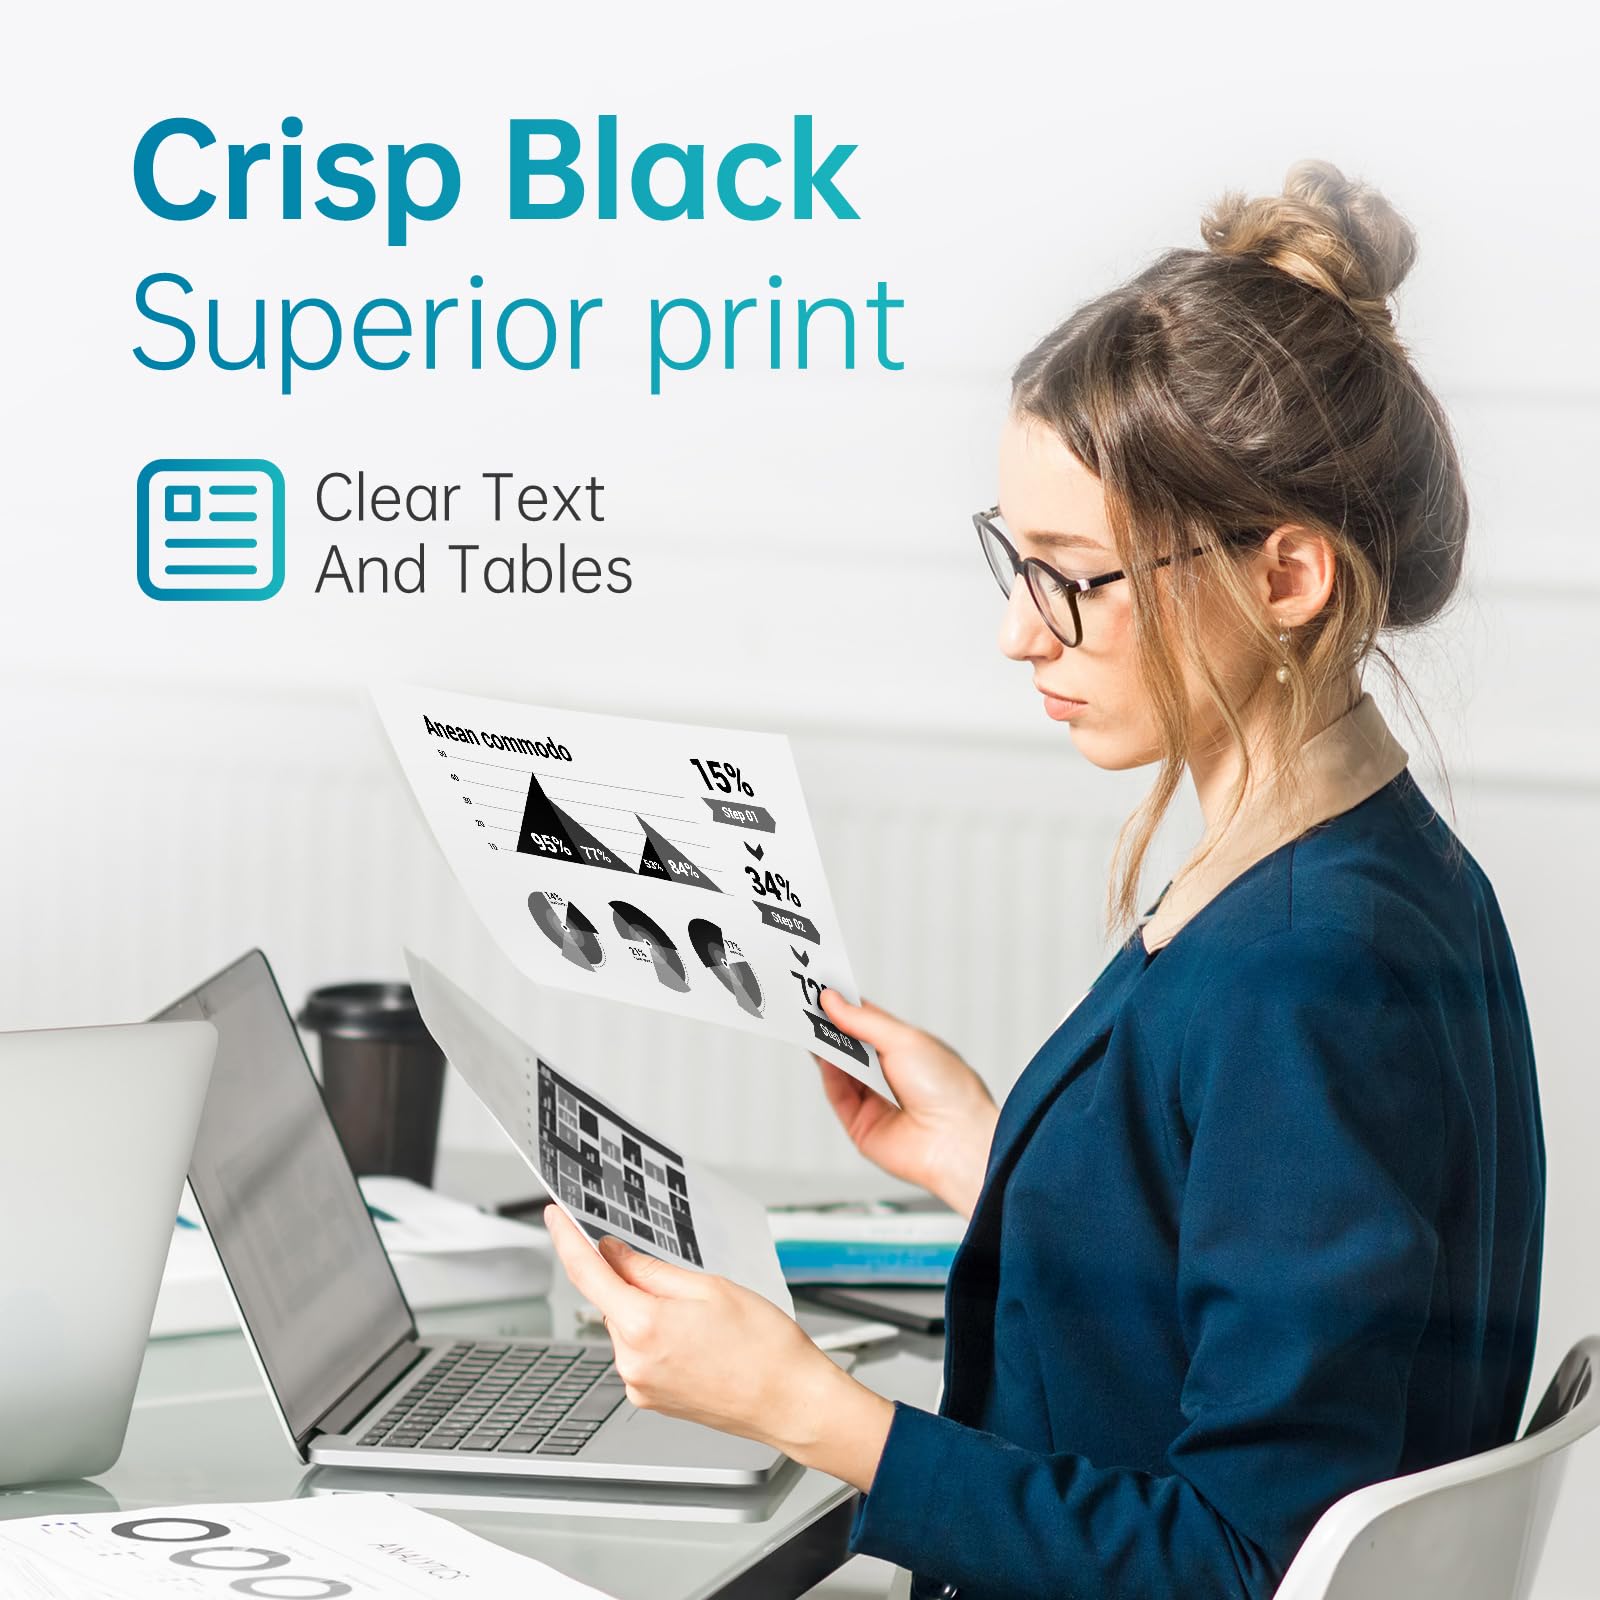 Demonstration of high-quality printing results with Epson 220XL black ink on office documents, ensuring crisp text clarity.